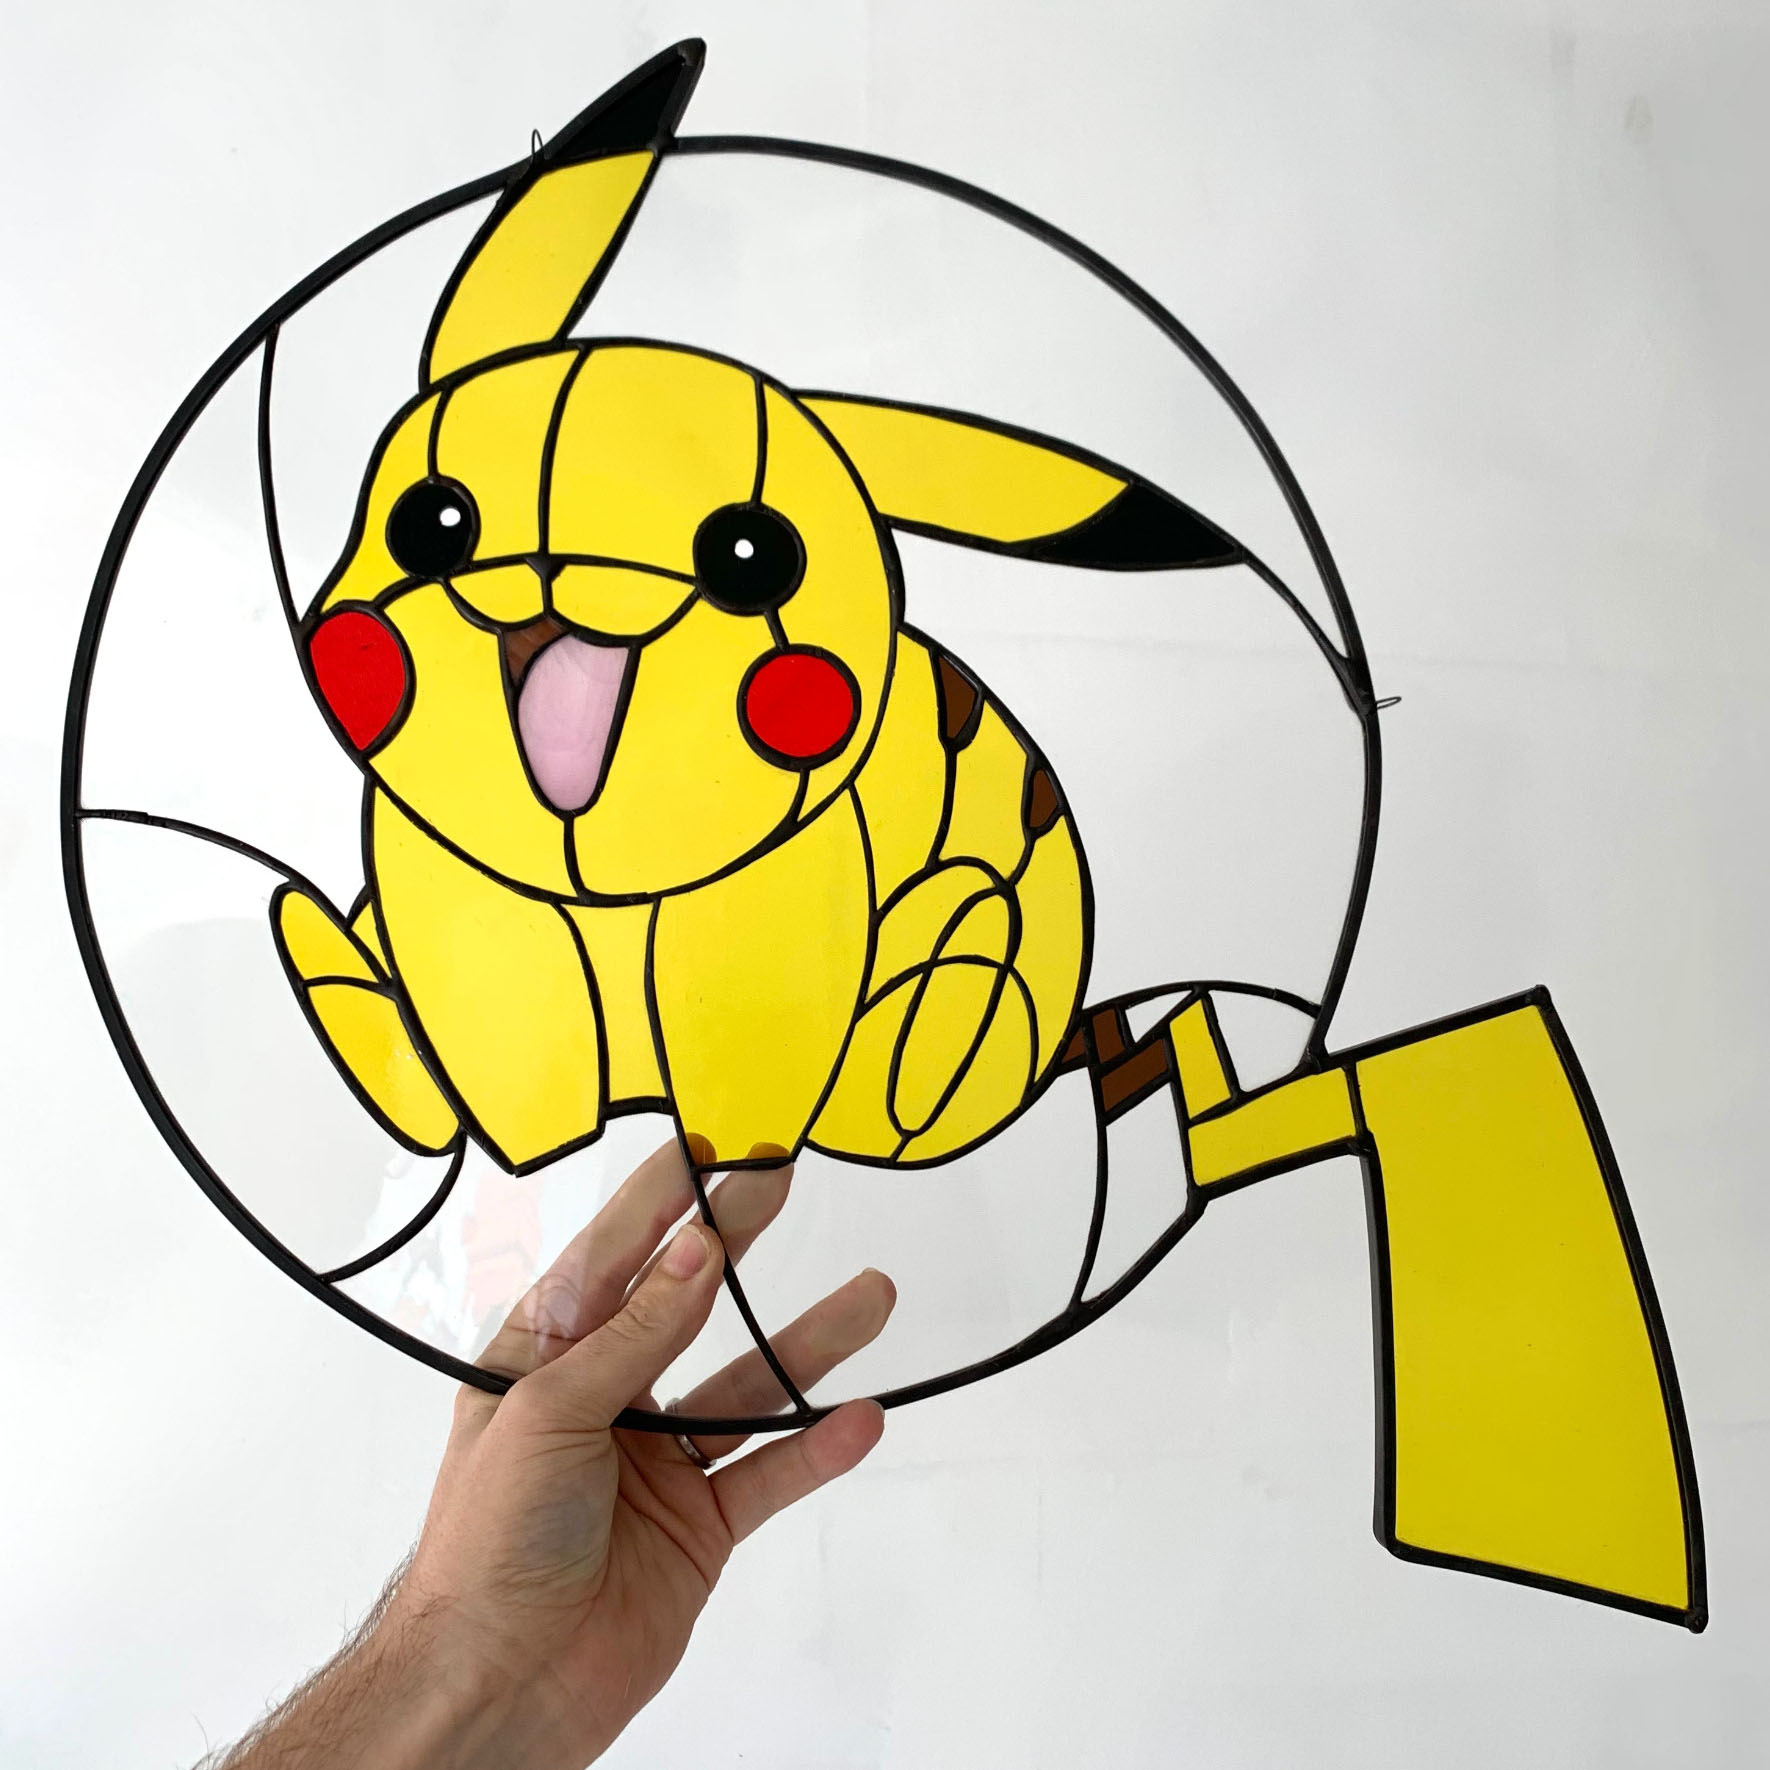 Pikachu stained glass art